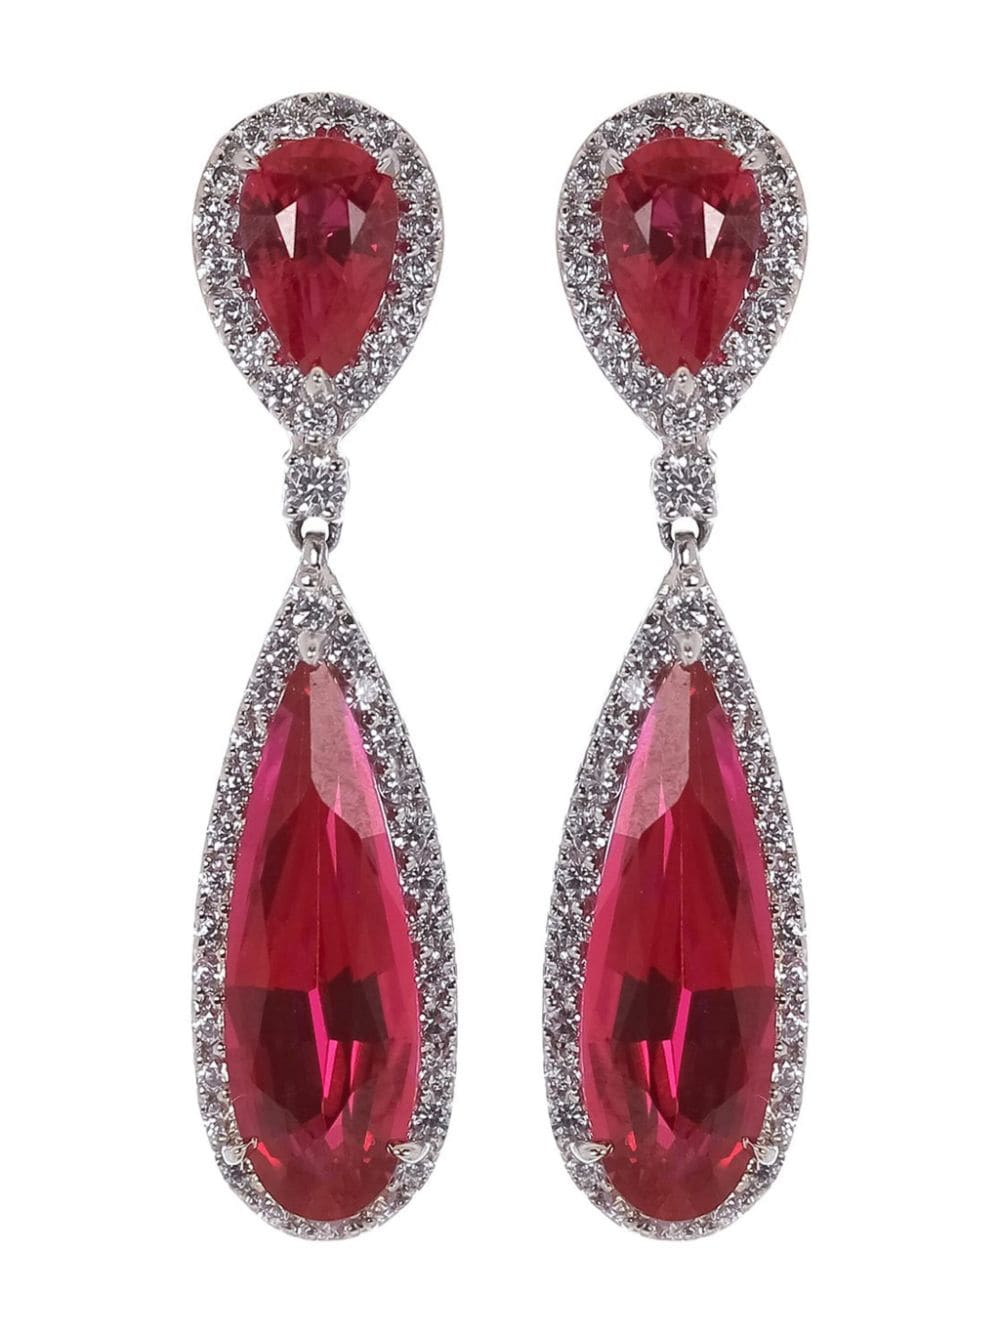 Fantasia by Deserio embellished teardrop earrings - Red von Fantasia by Deserio